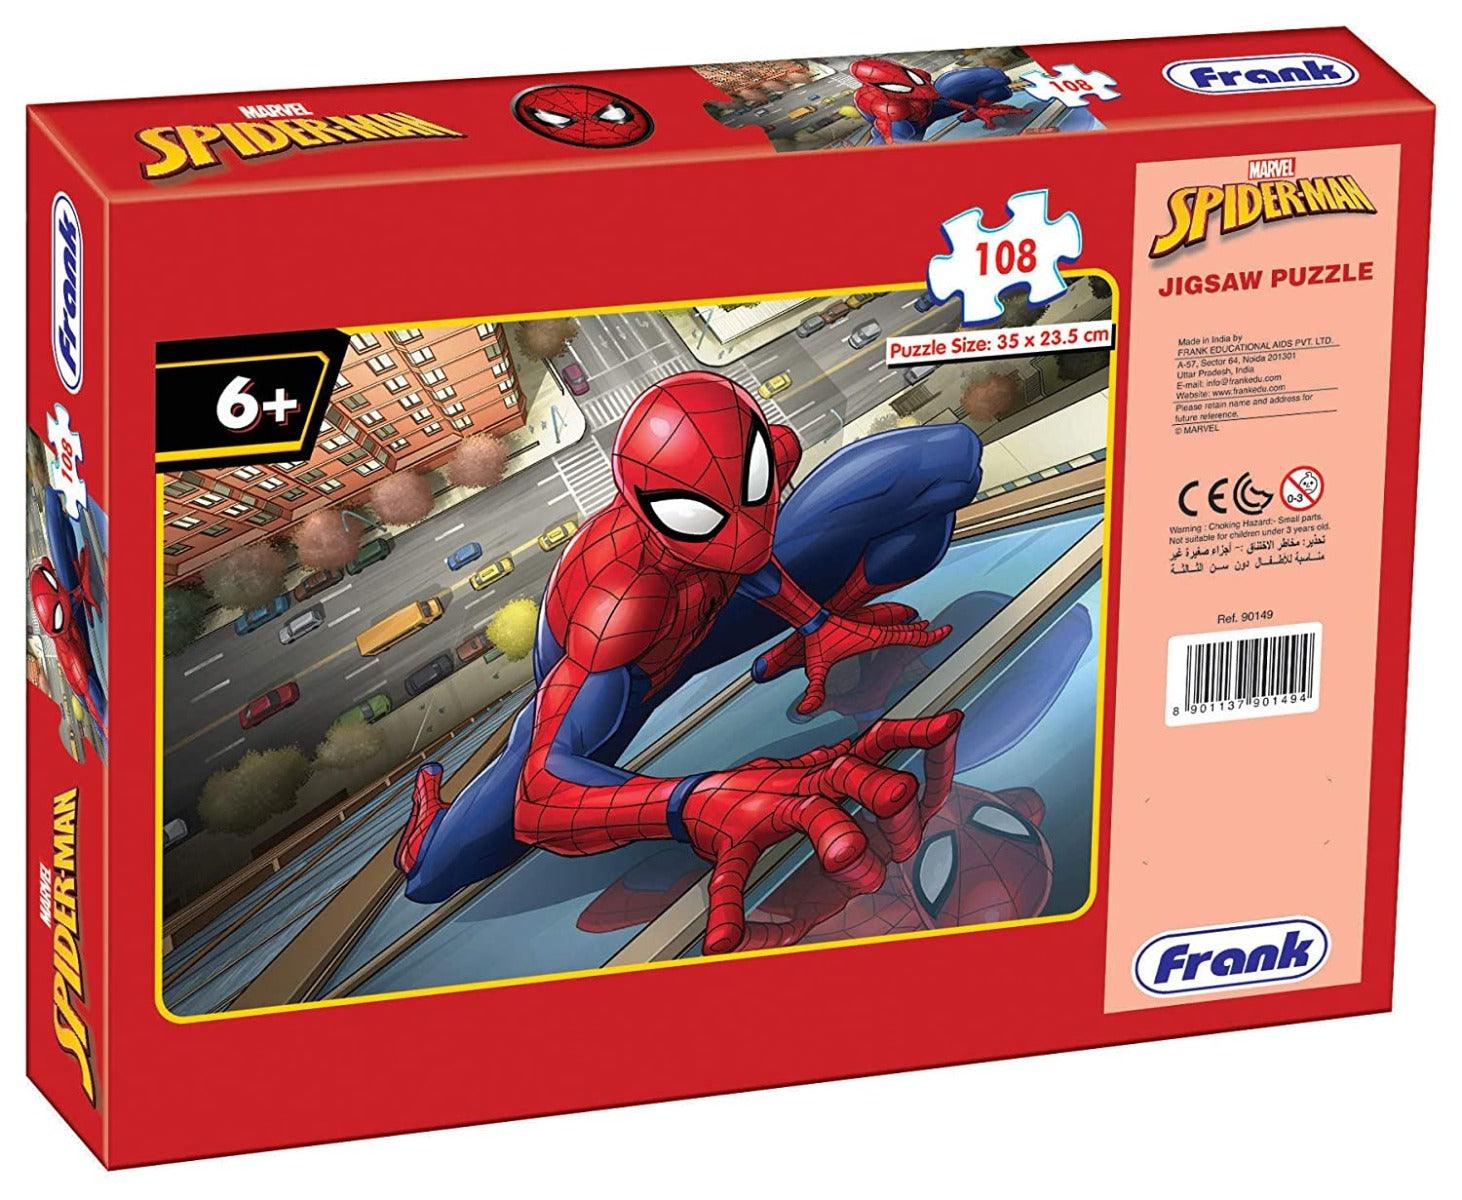 Frank Marvel Spider-Man 108 Pieces Jigsaw Puzzles for 6 Year Old Kids and Above